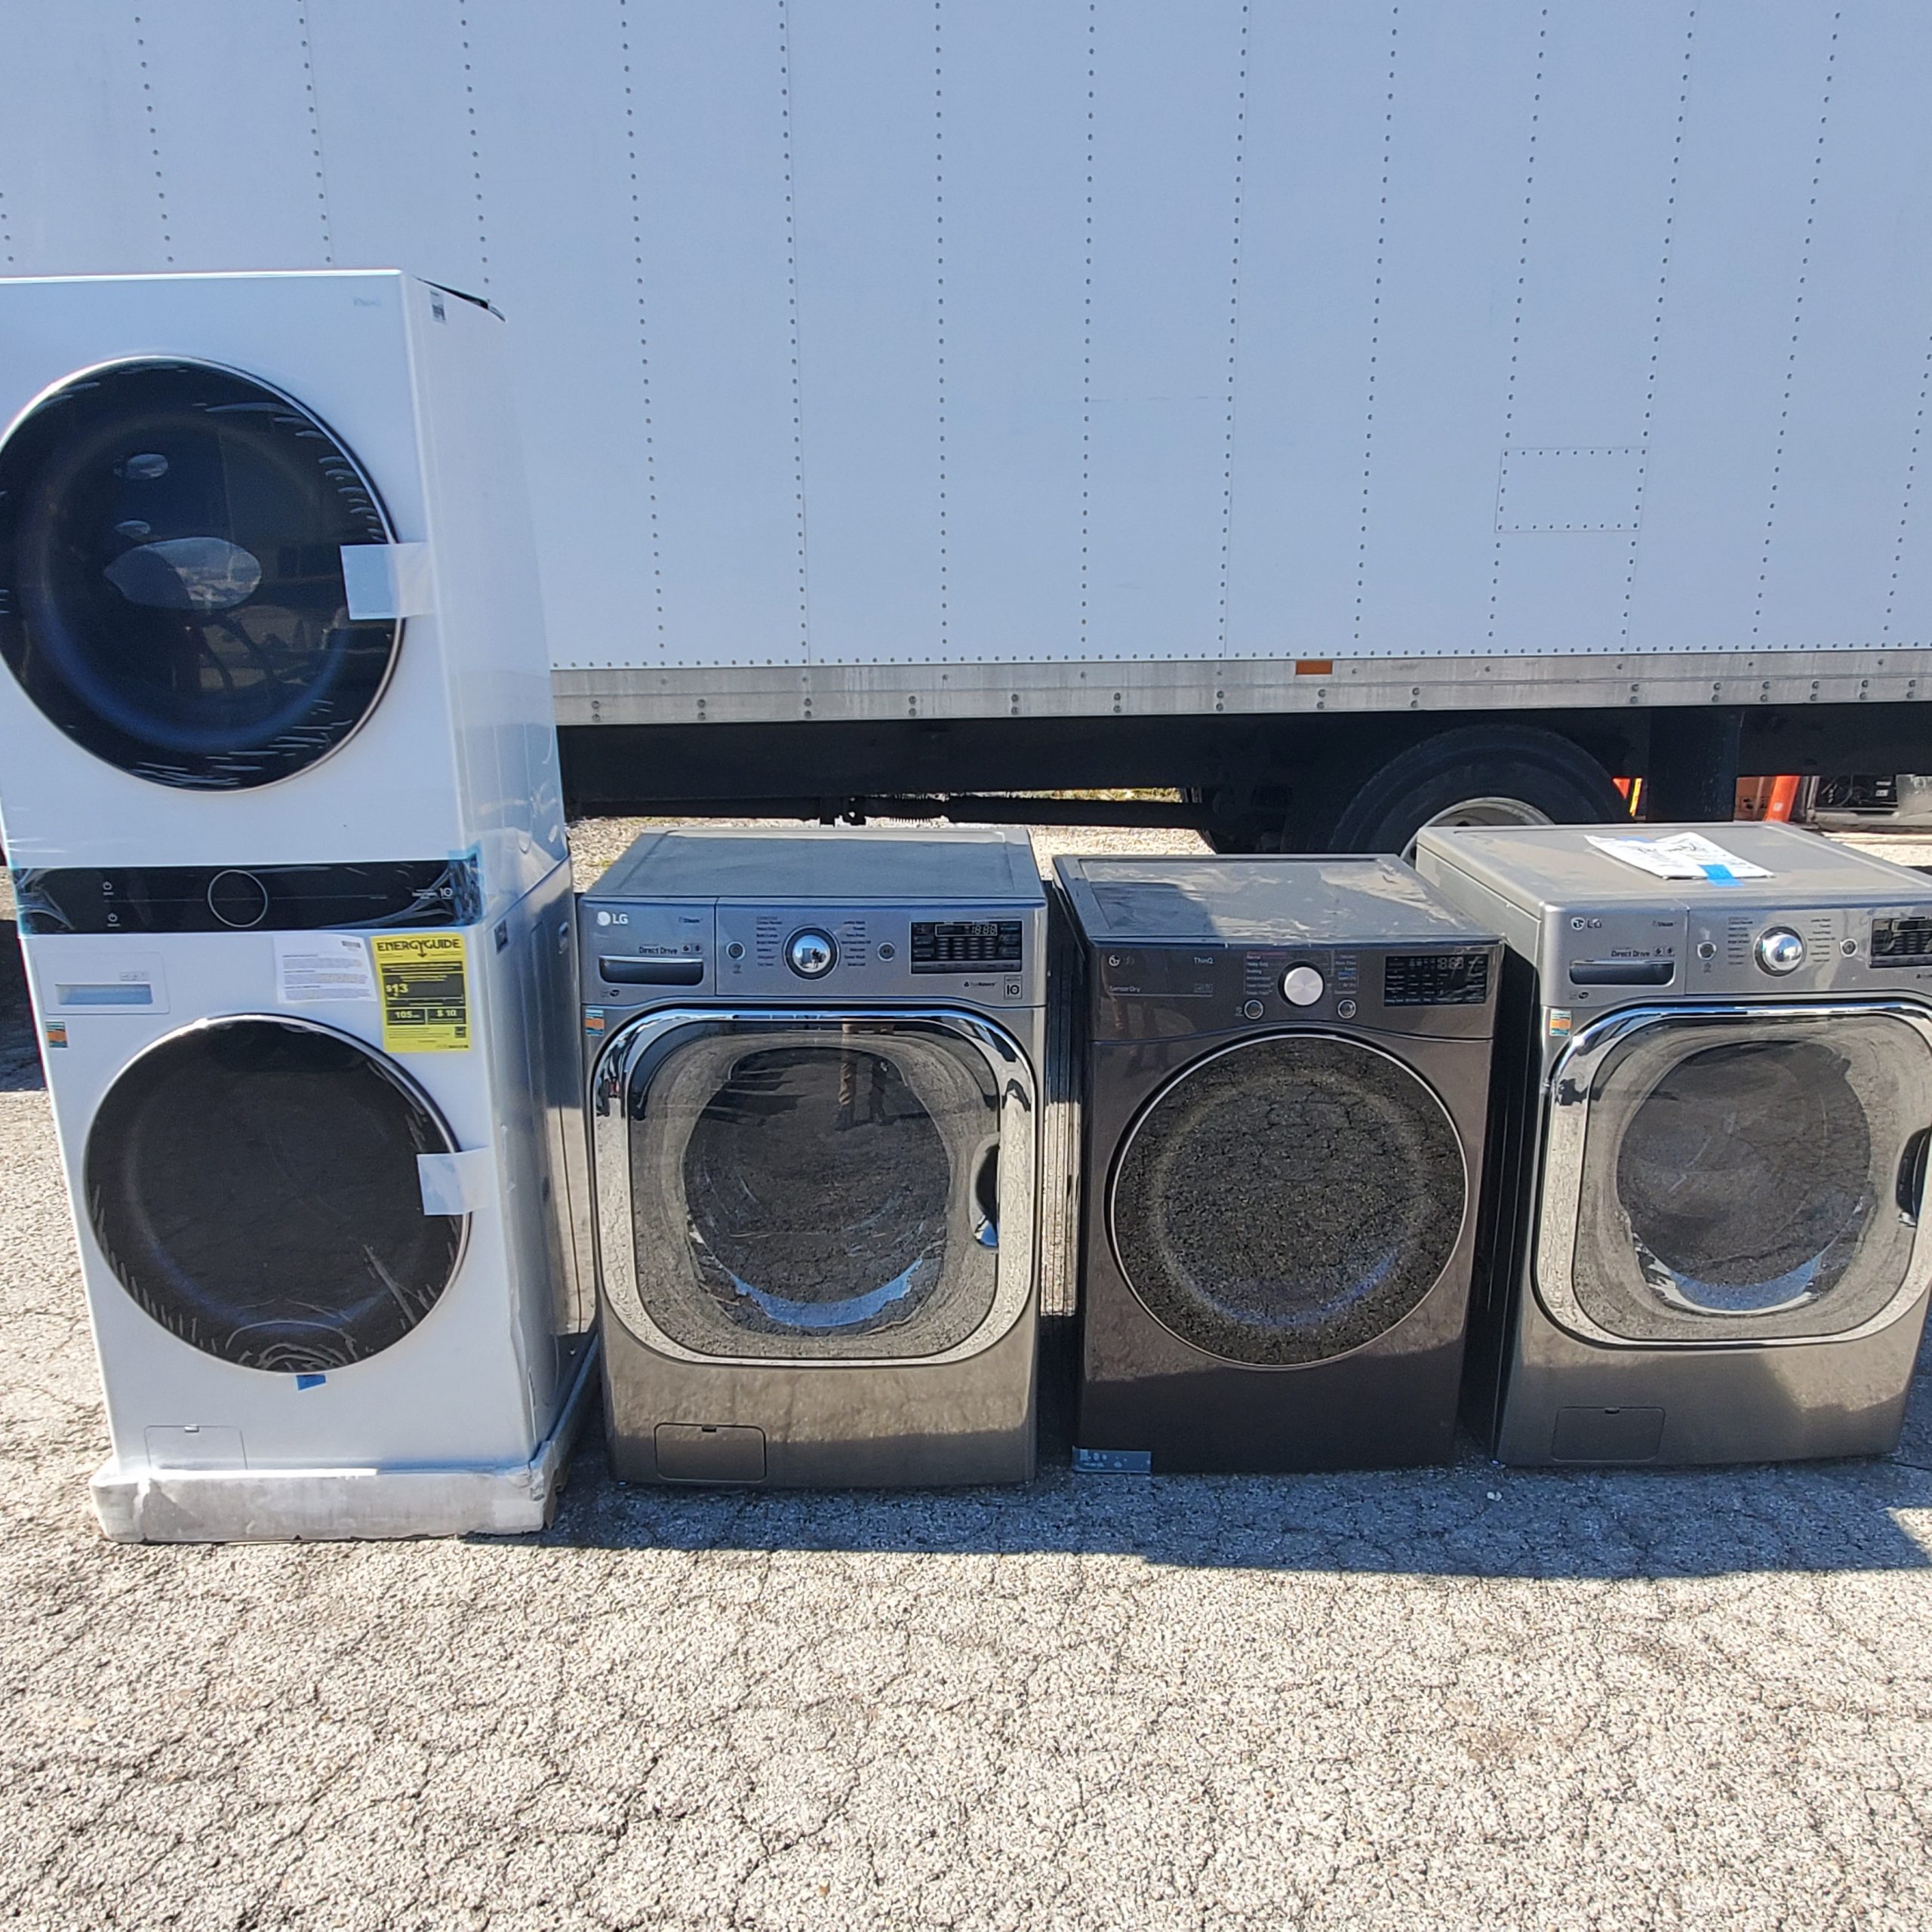 example photos of LG Scratch and dent truck loads contain a wide variety of kitchen and laundry appliances.